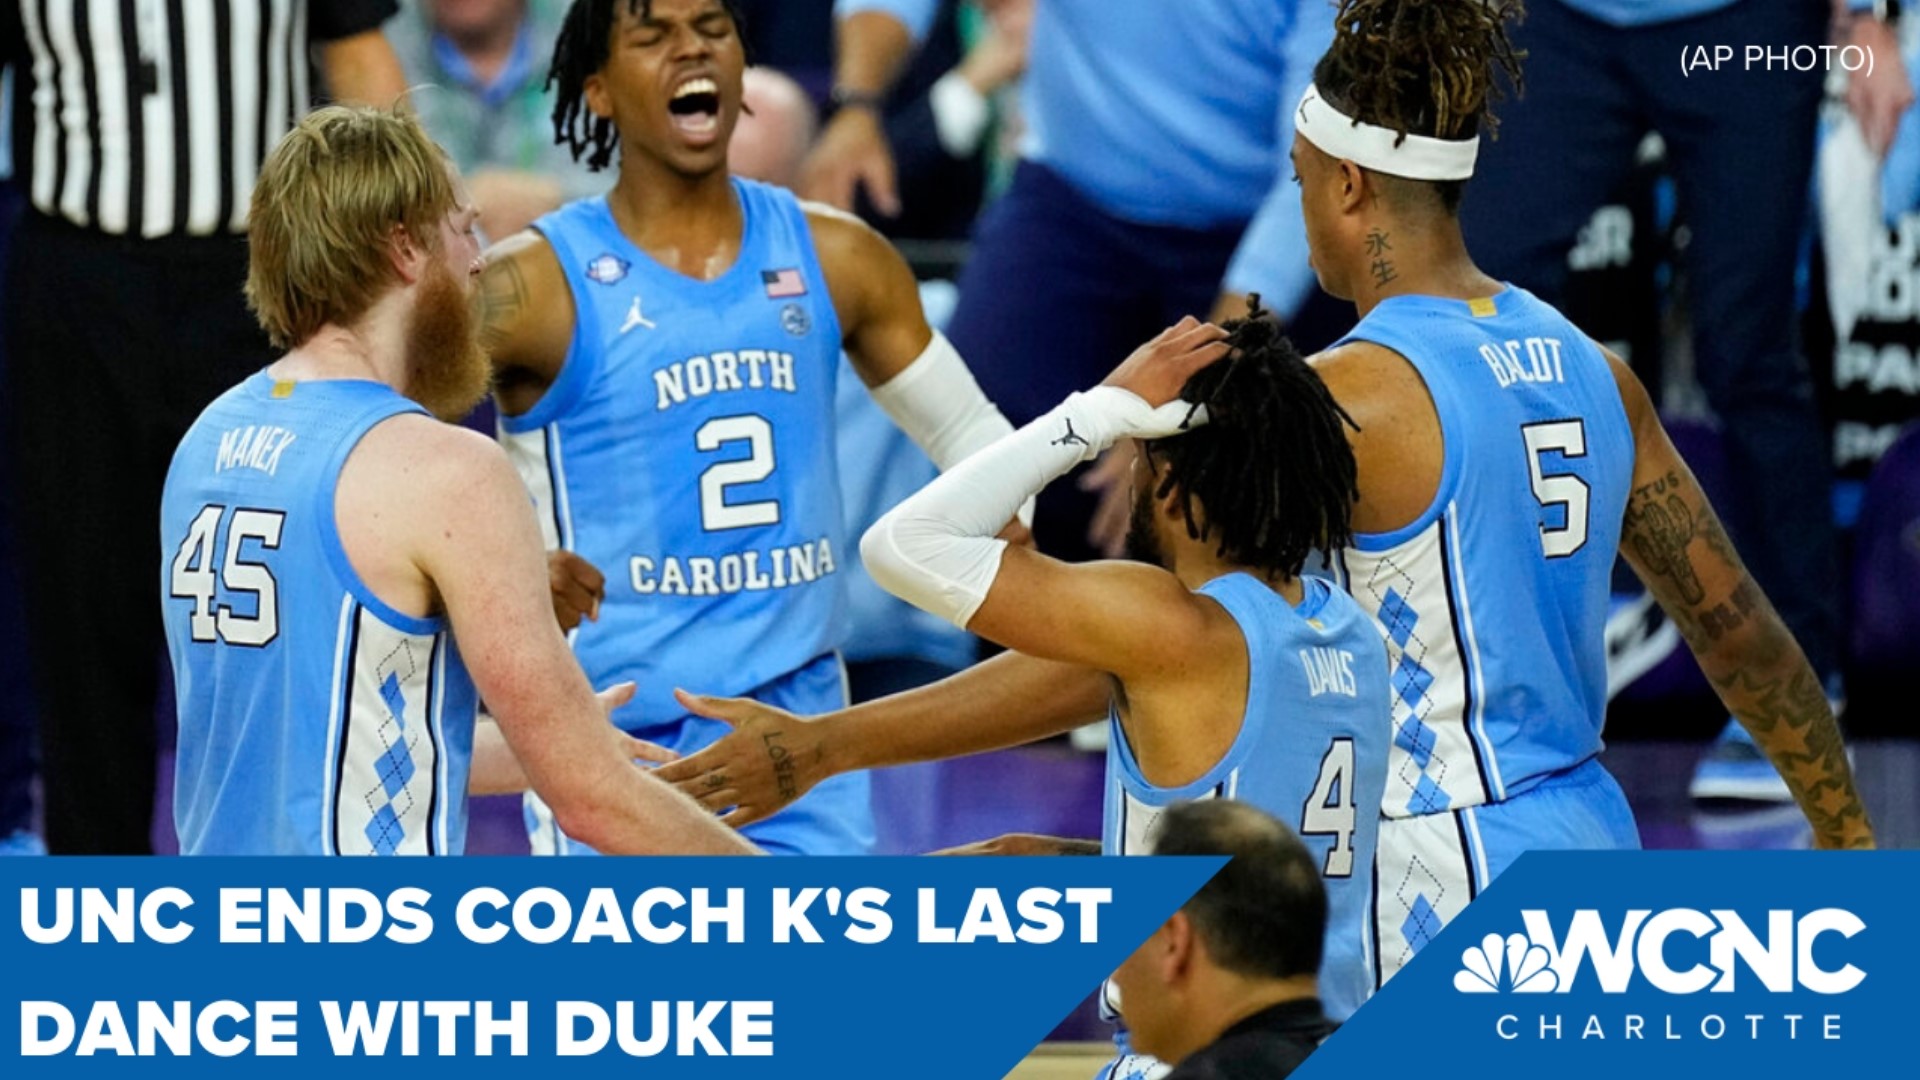 Coach K knocked out by the Tar Heels 